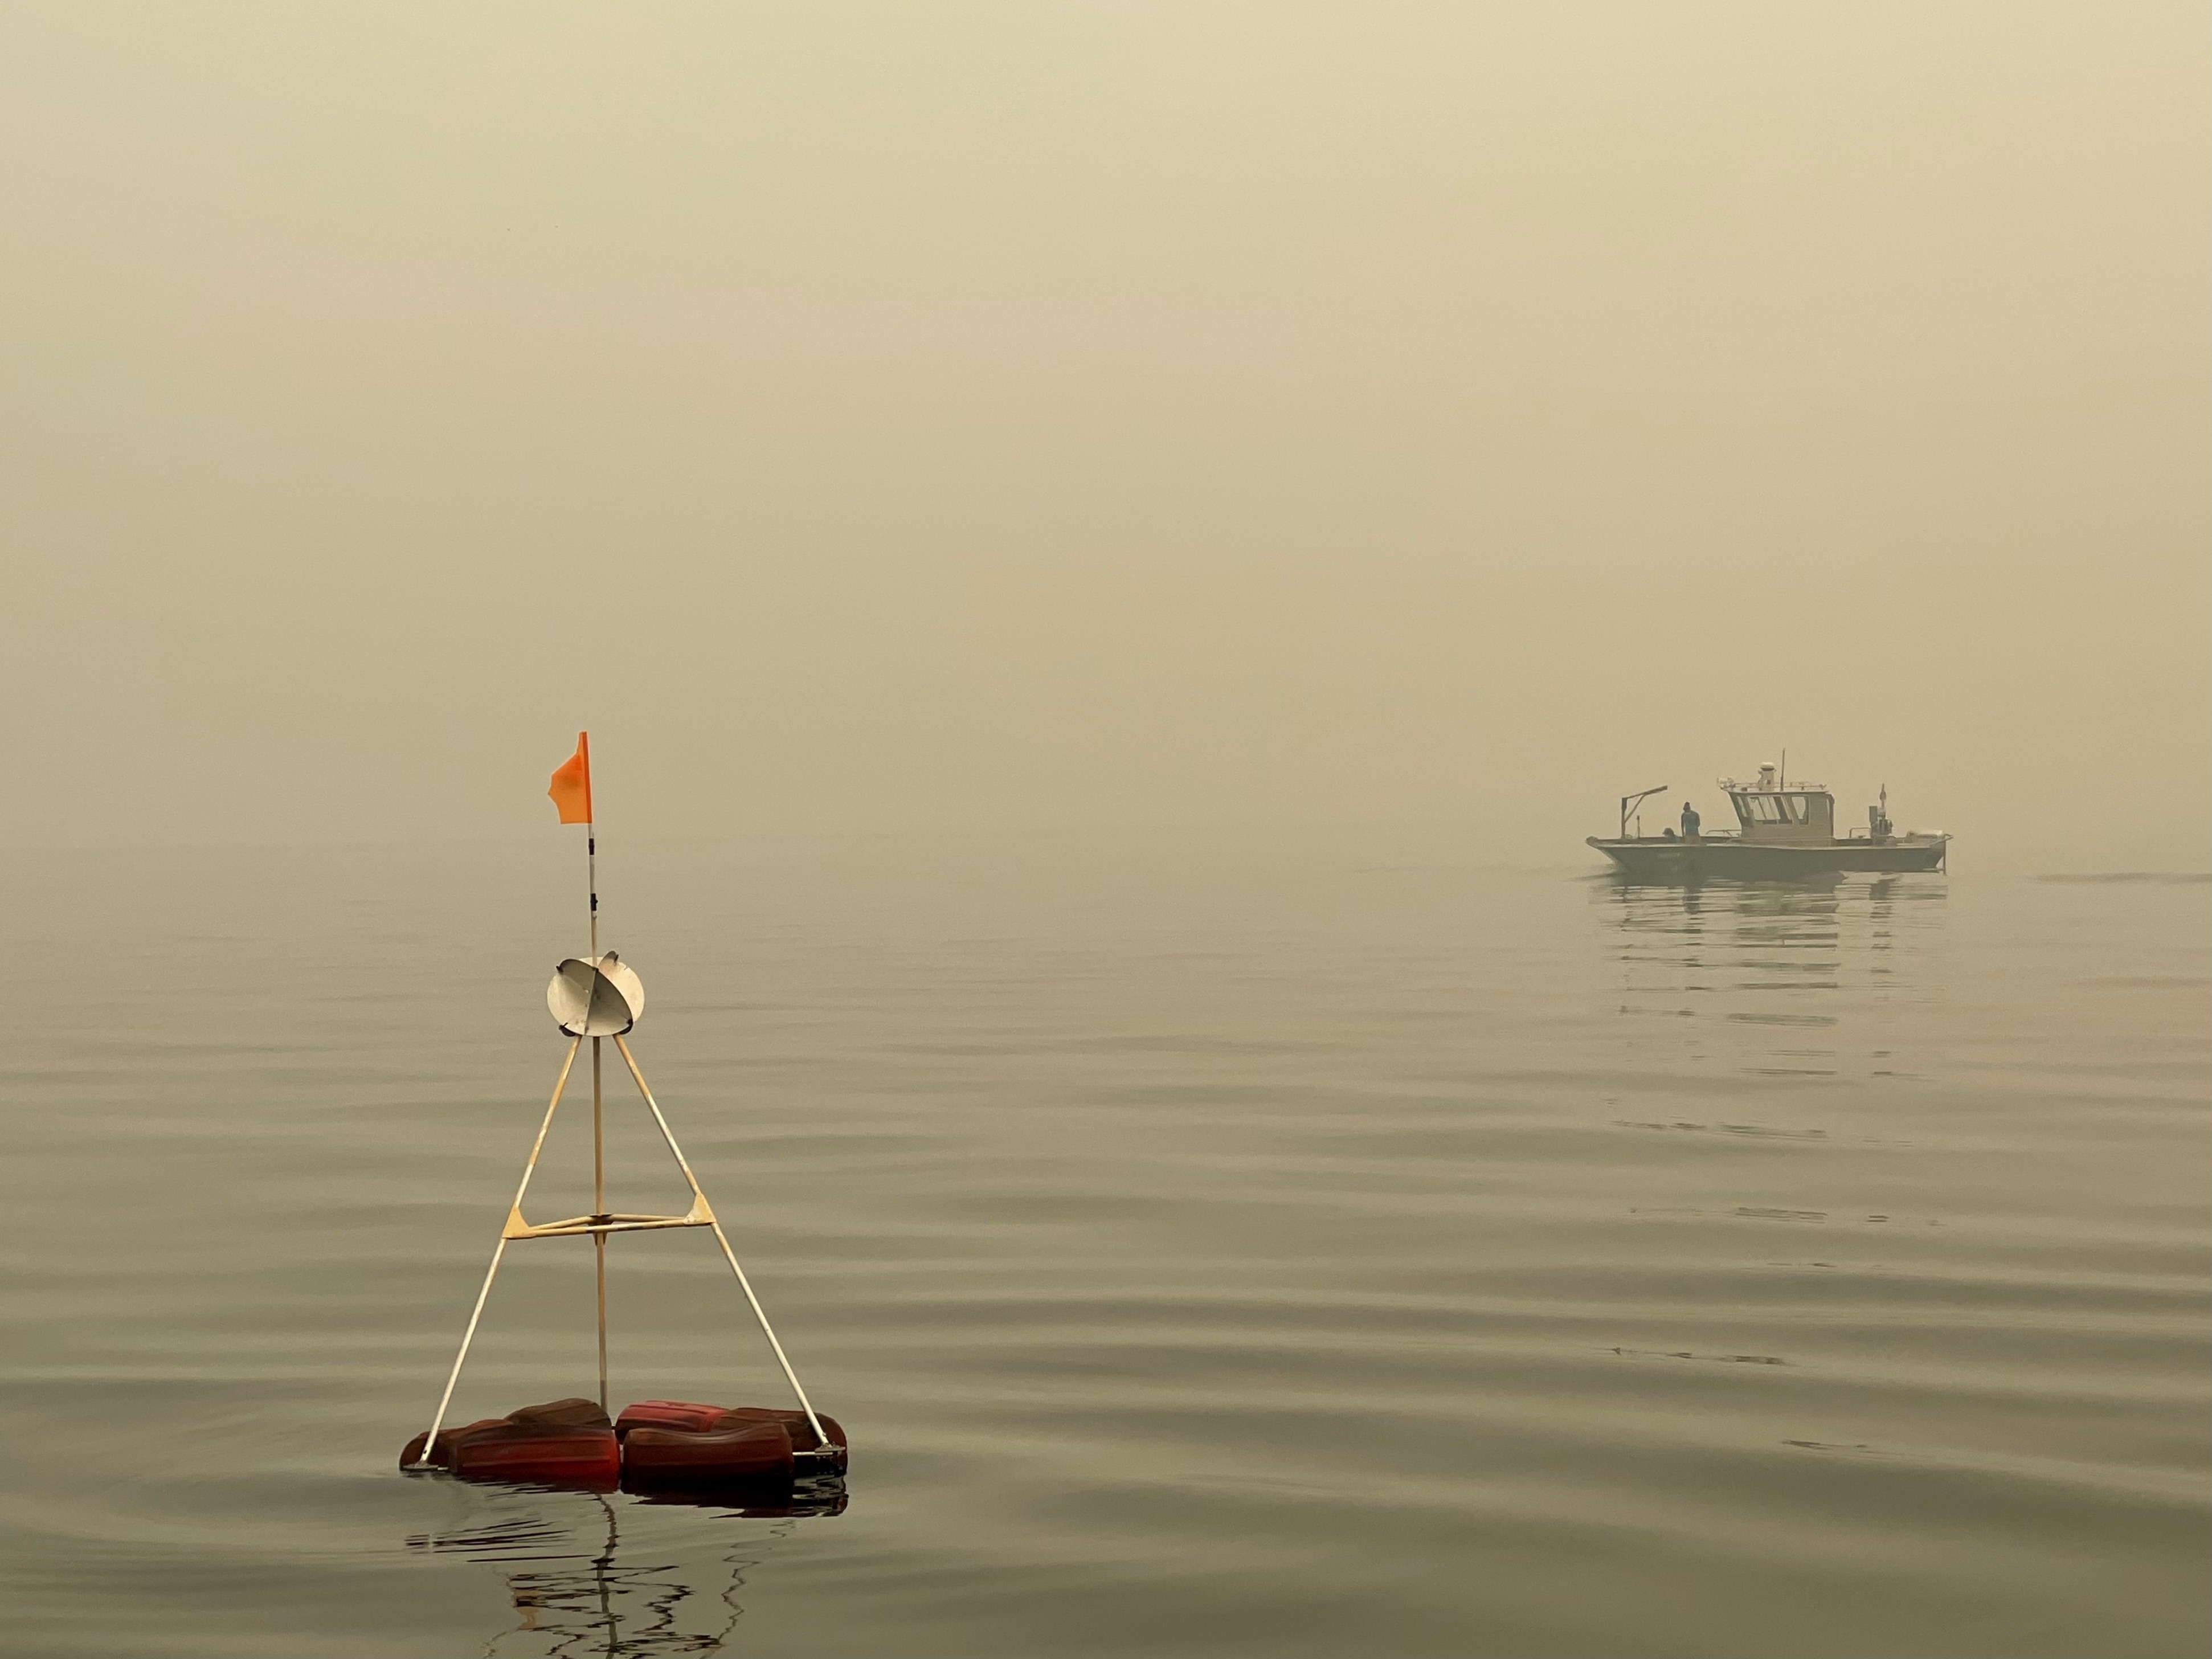 buoy on lake tahoe with research vessel in the background amid smoke-covered skies